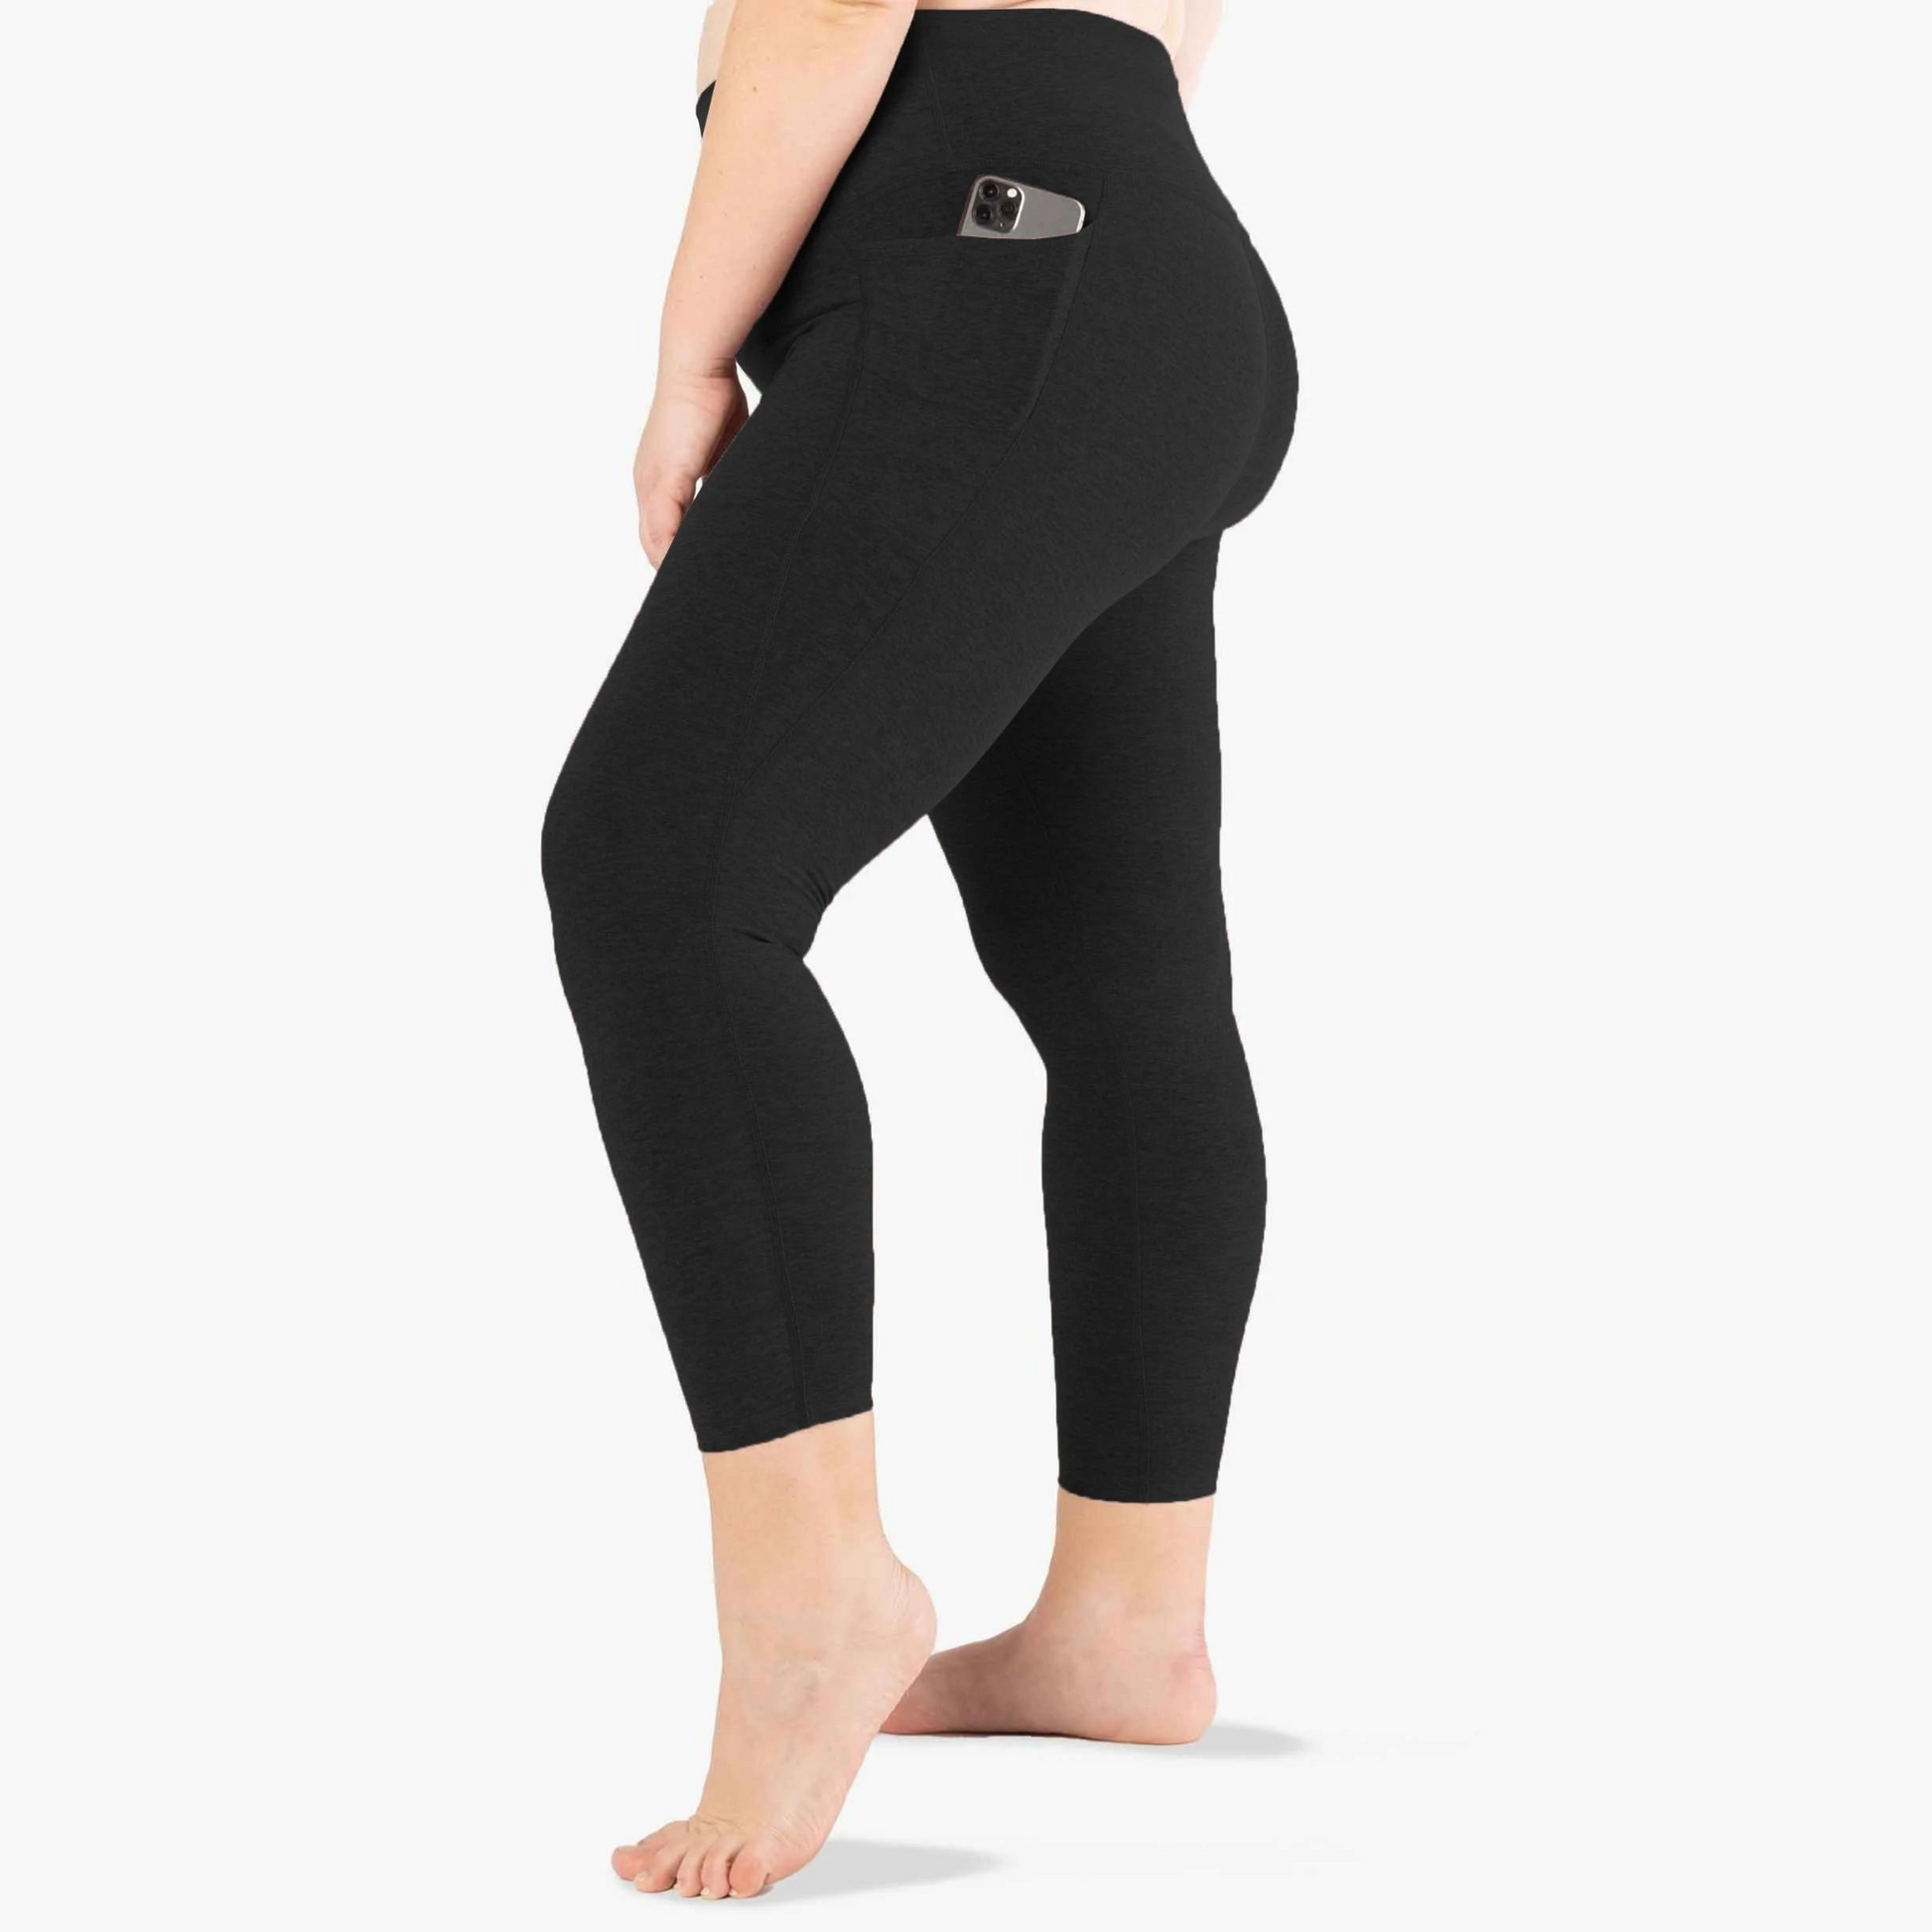 side of dark charcoal midi length legging with phone in pocket